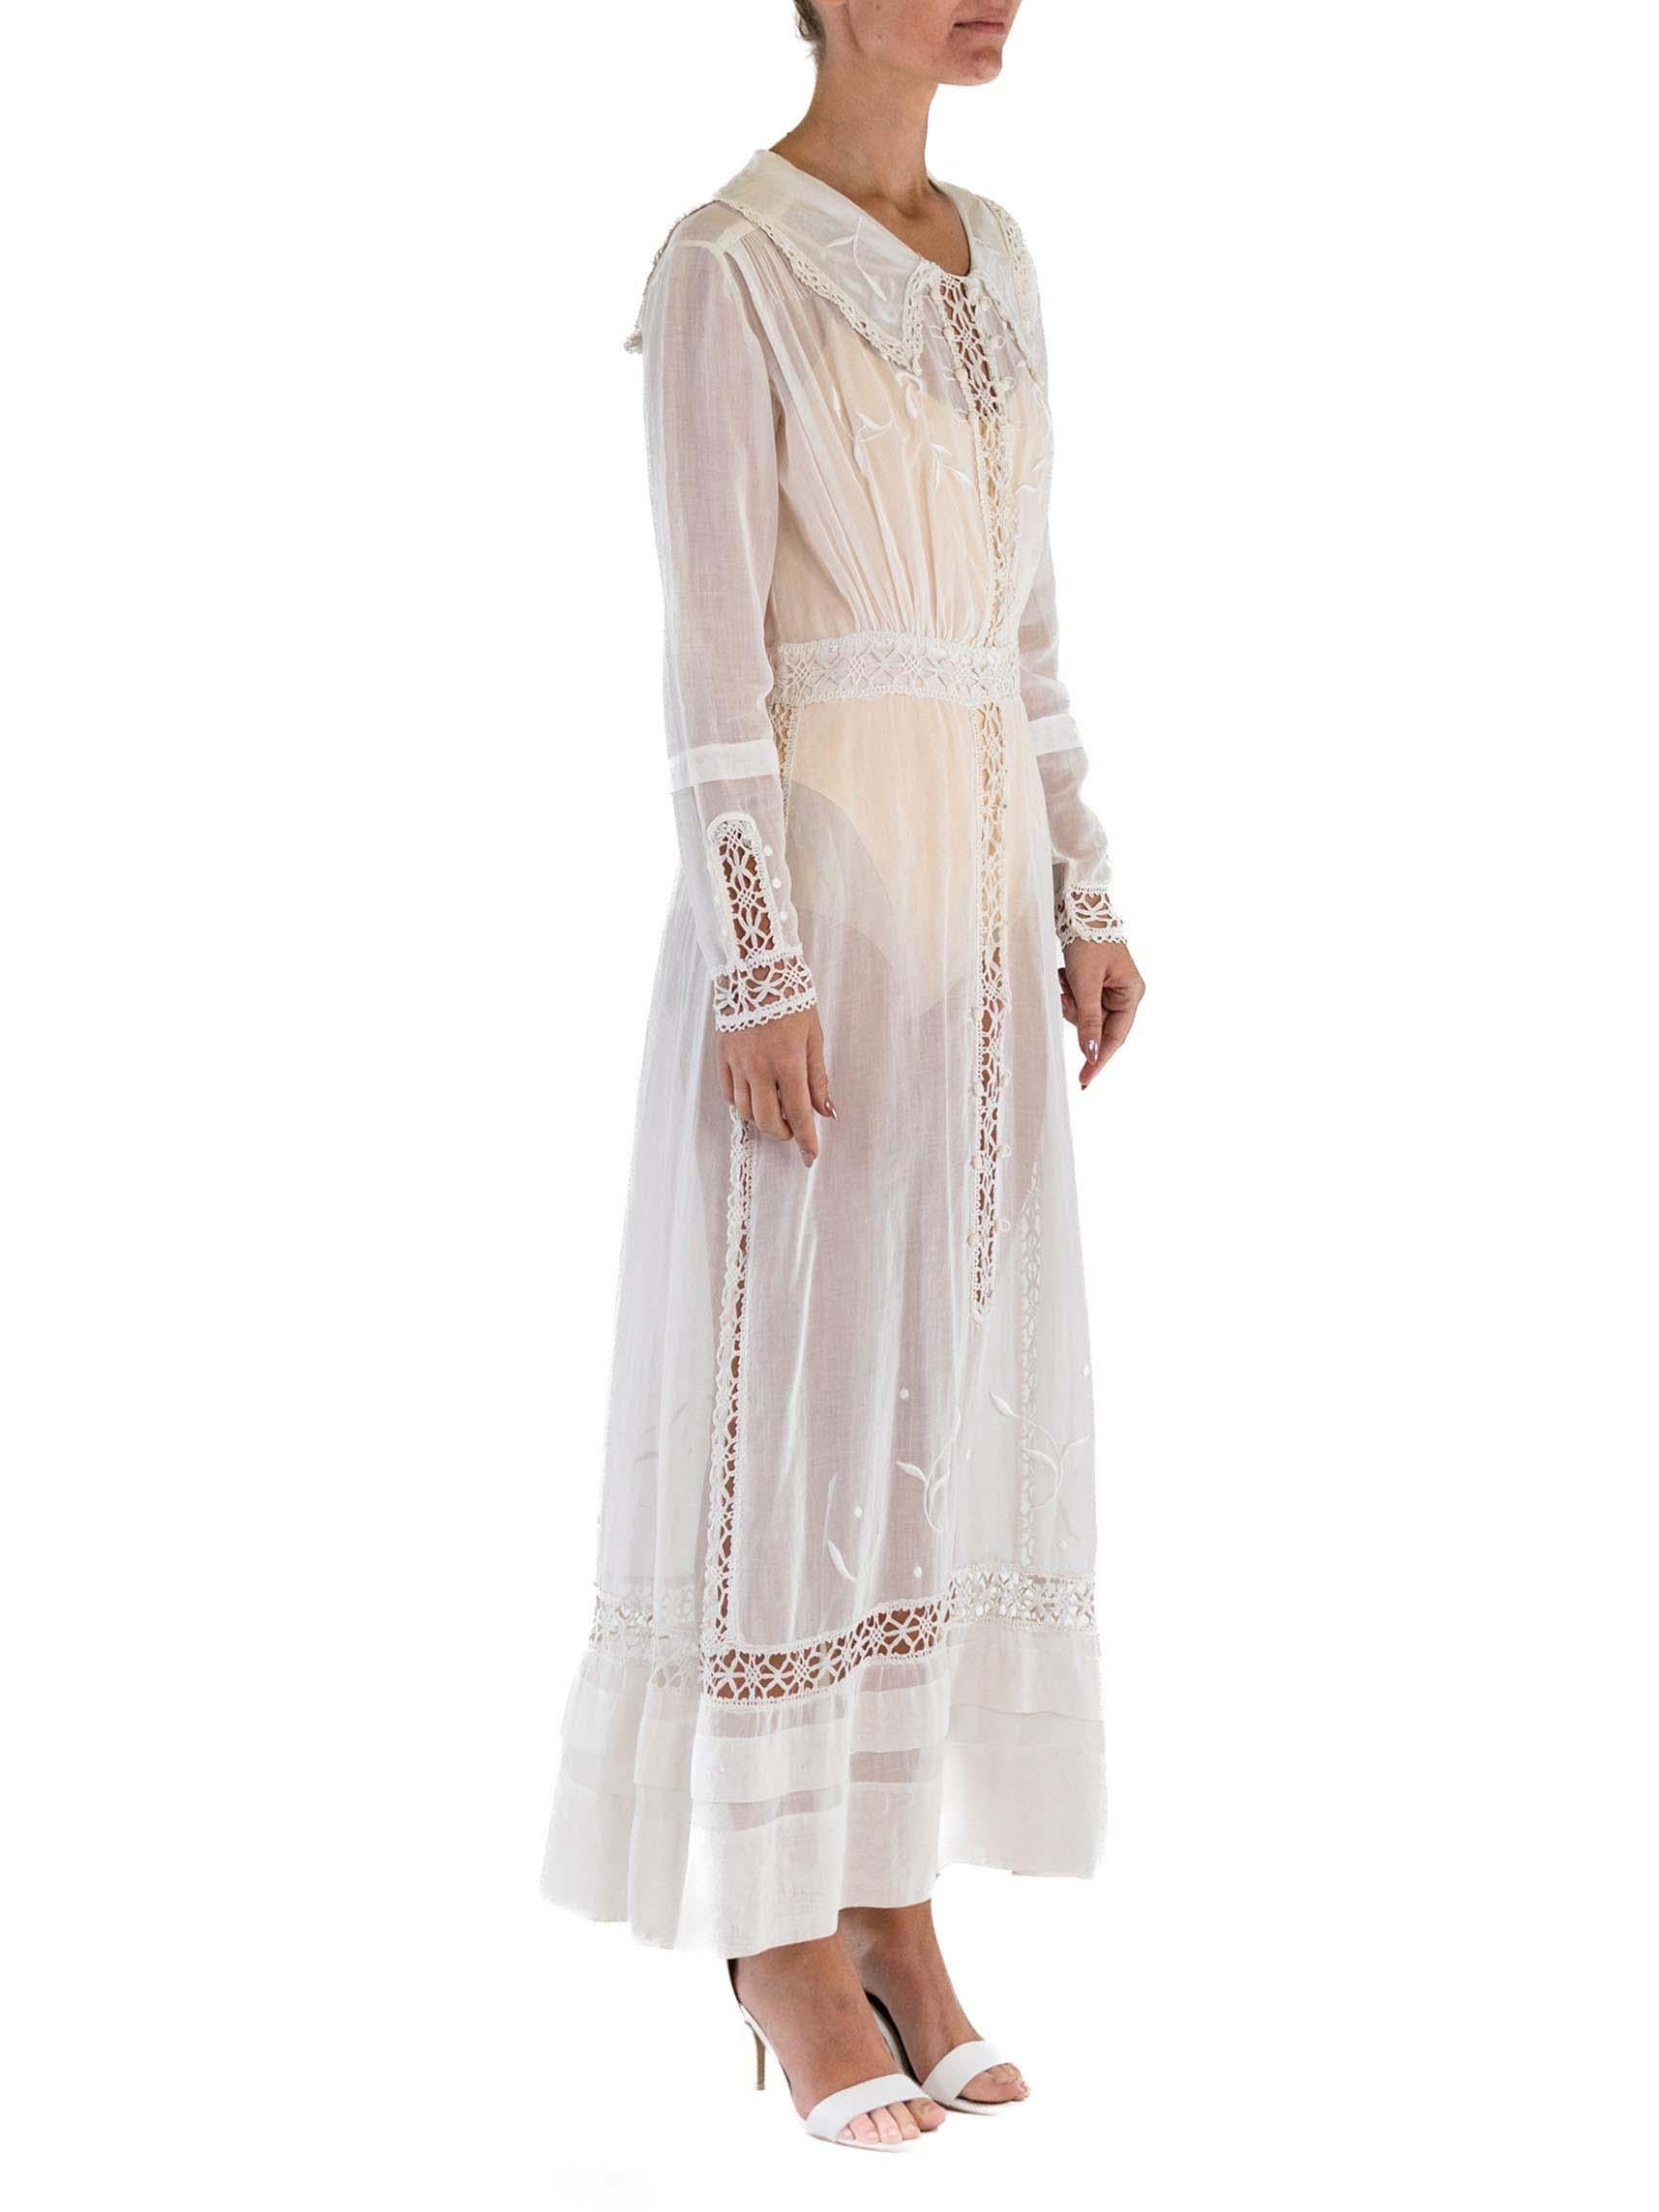 Edwardian White Organic Cotton Lace Sailor Collar Tea Dress With Sleeves In Excellent Condition For Sale In New York, NY